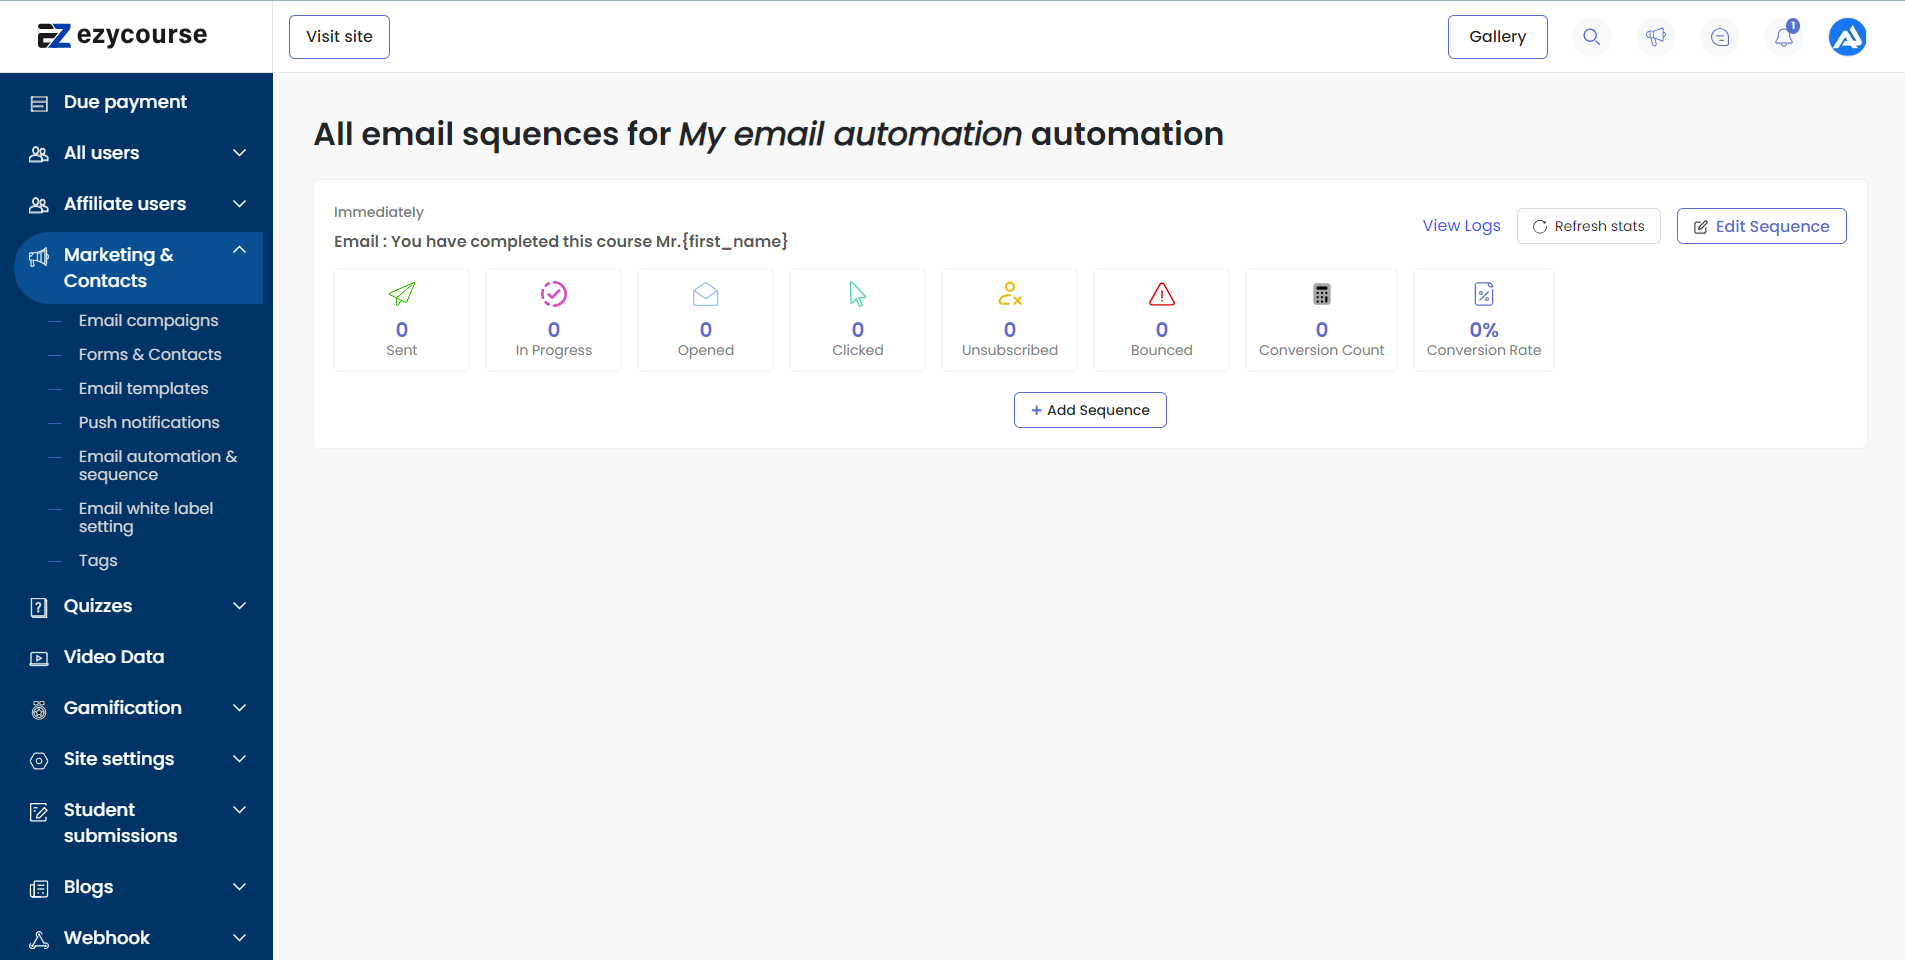 View & Analyze Automation Results